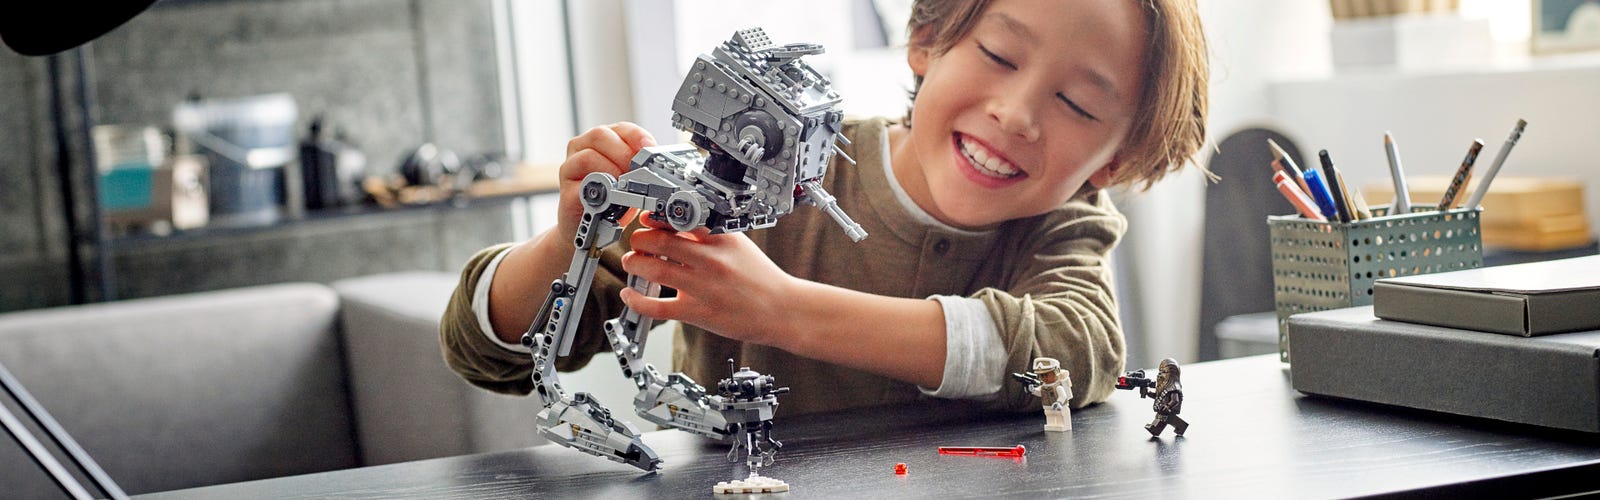 Top Star Wars™ Gifts for Kids & Teens